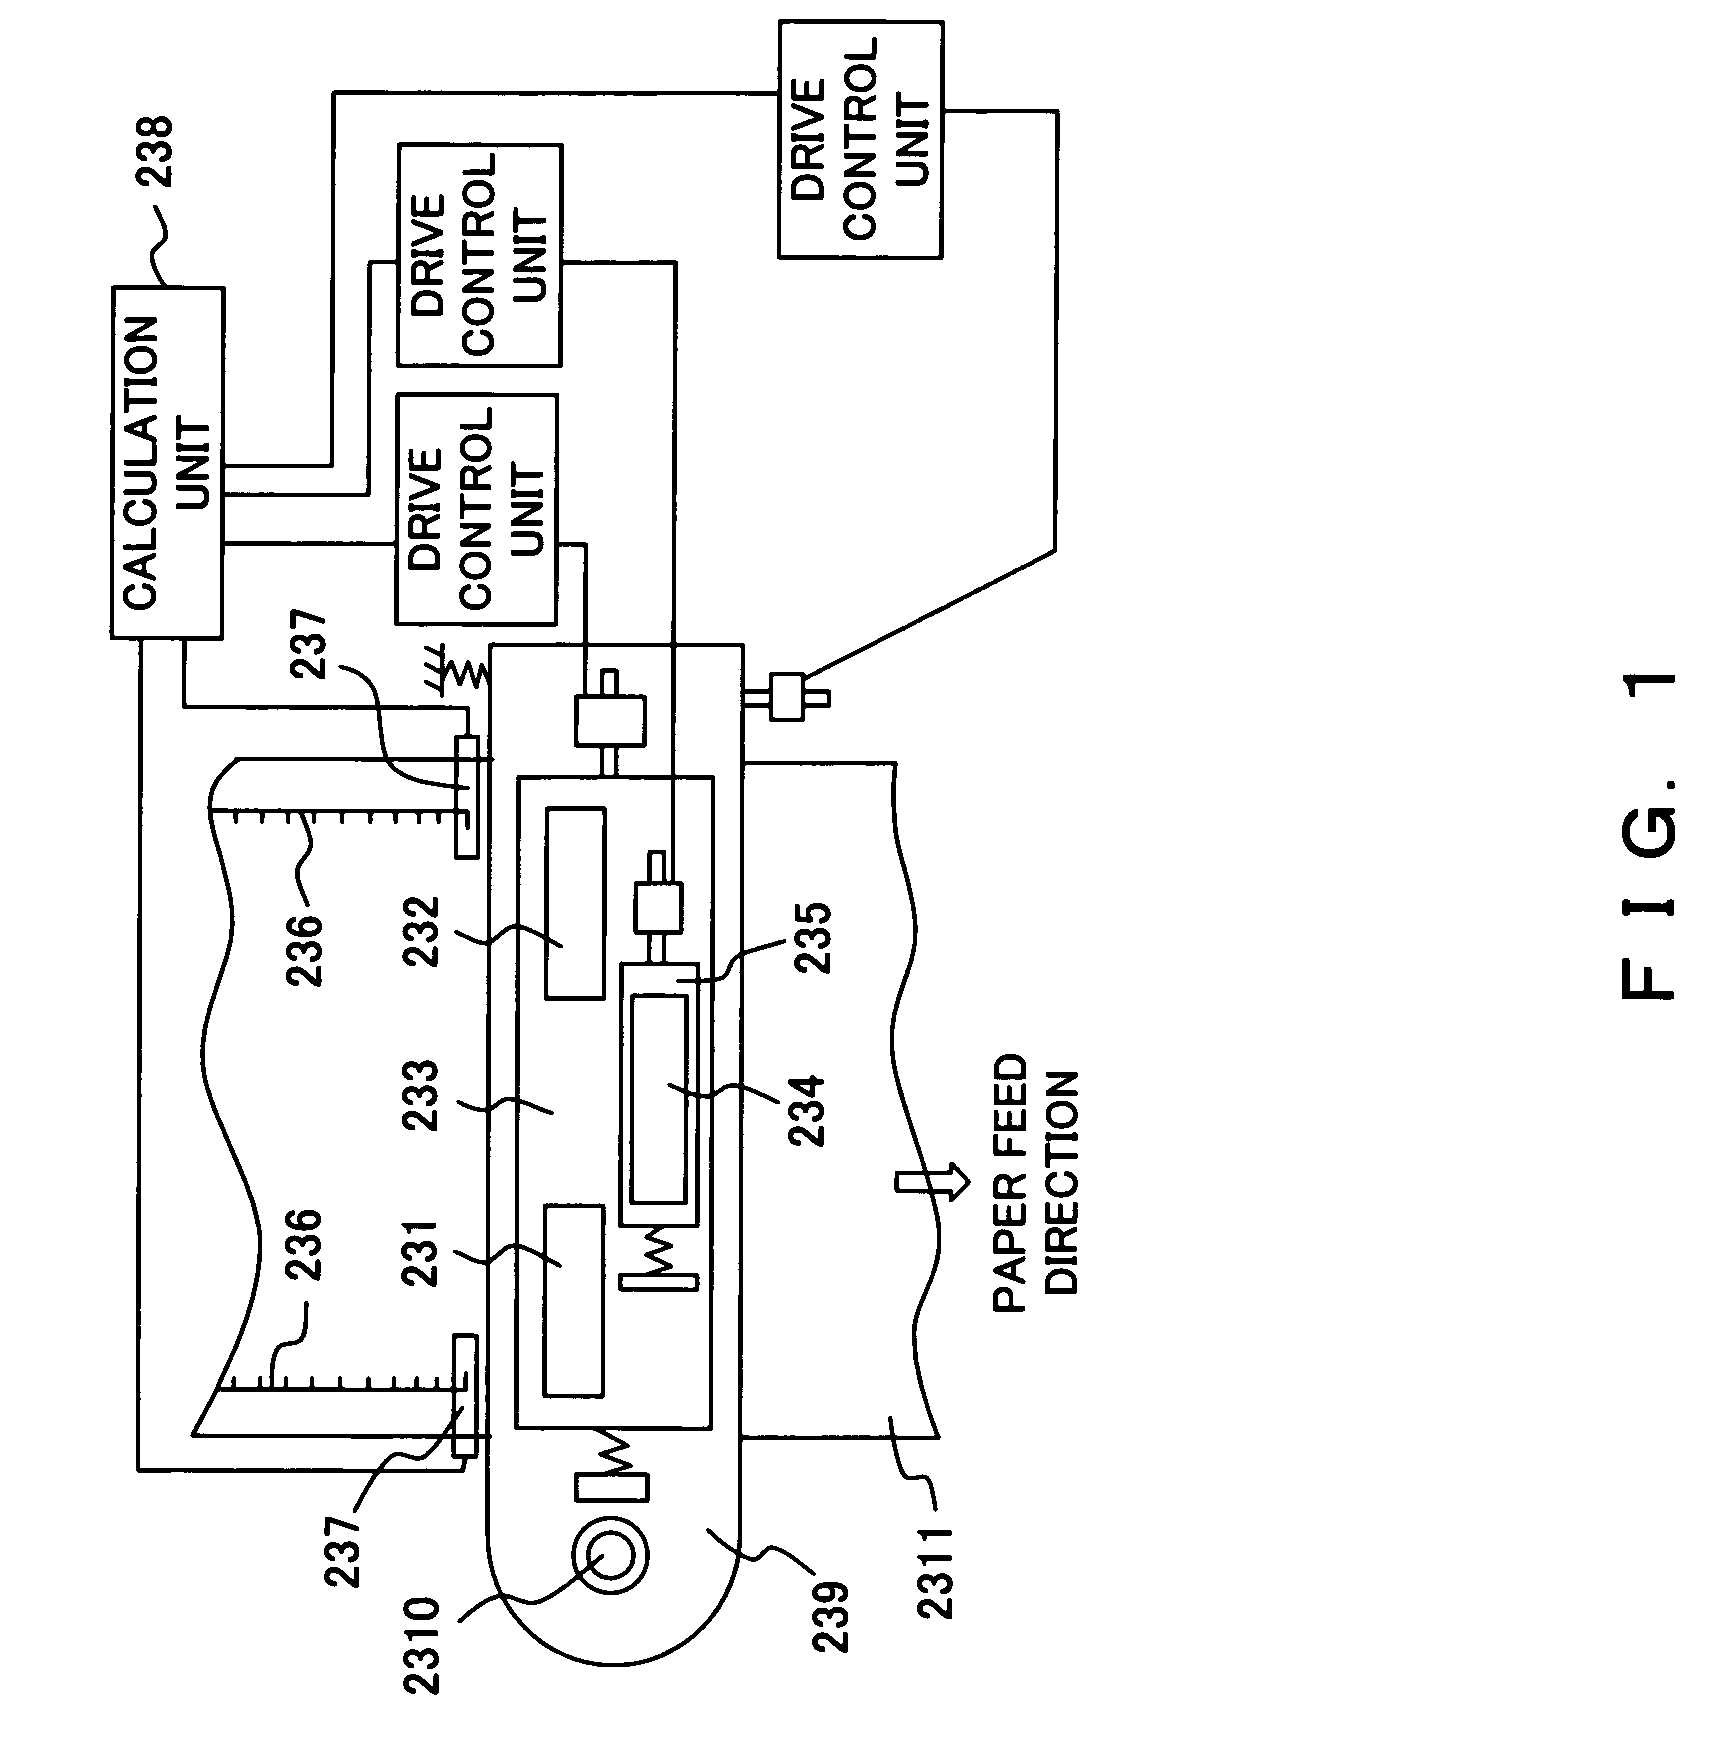 Image forming apparatus having position detection mechanism